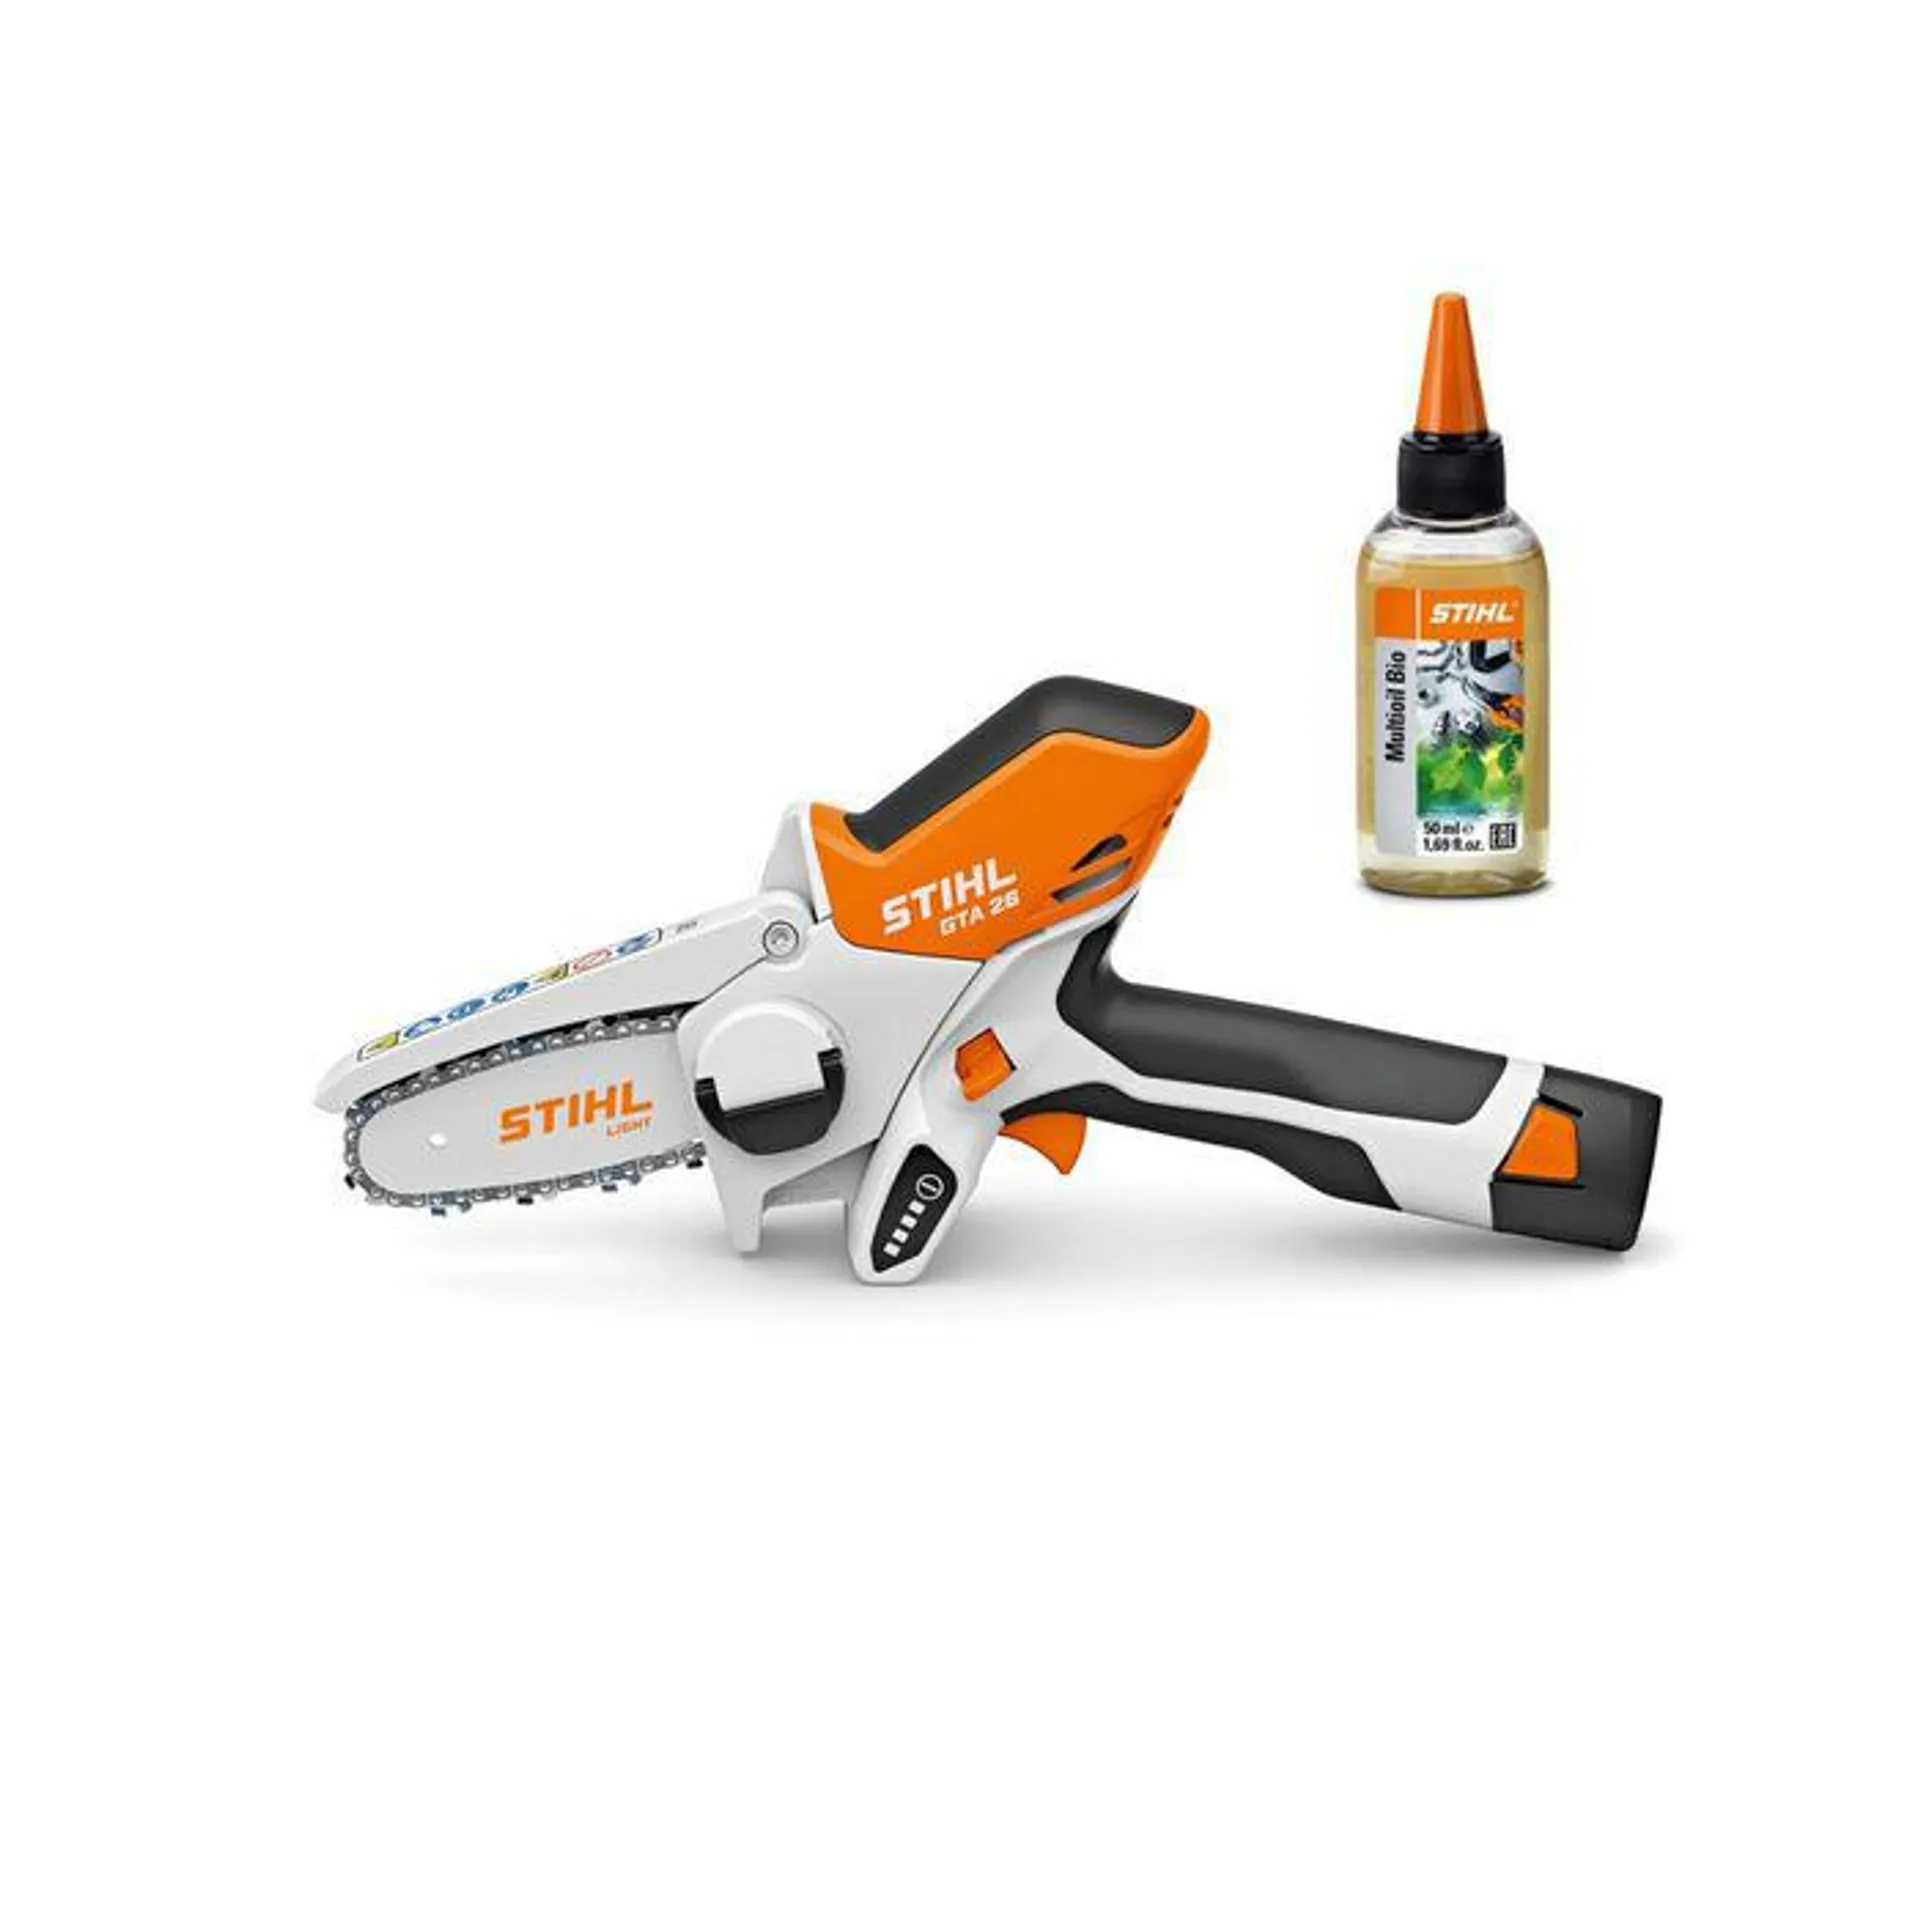 STIHL GTA 26 Battery Pruner Tool No Battery & Charger